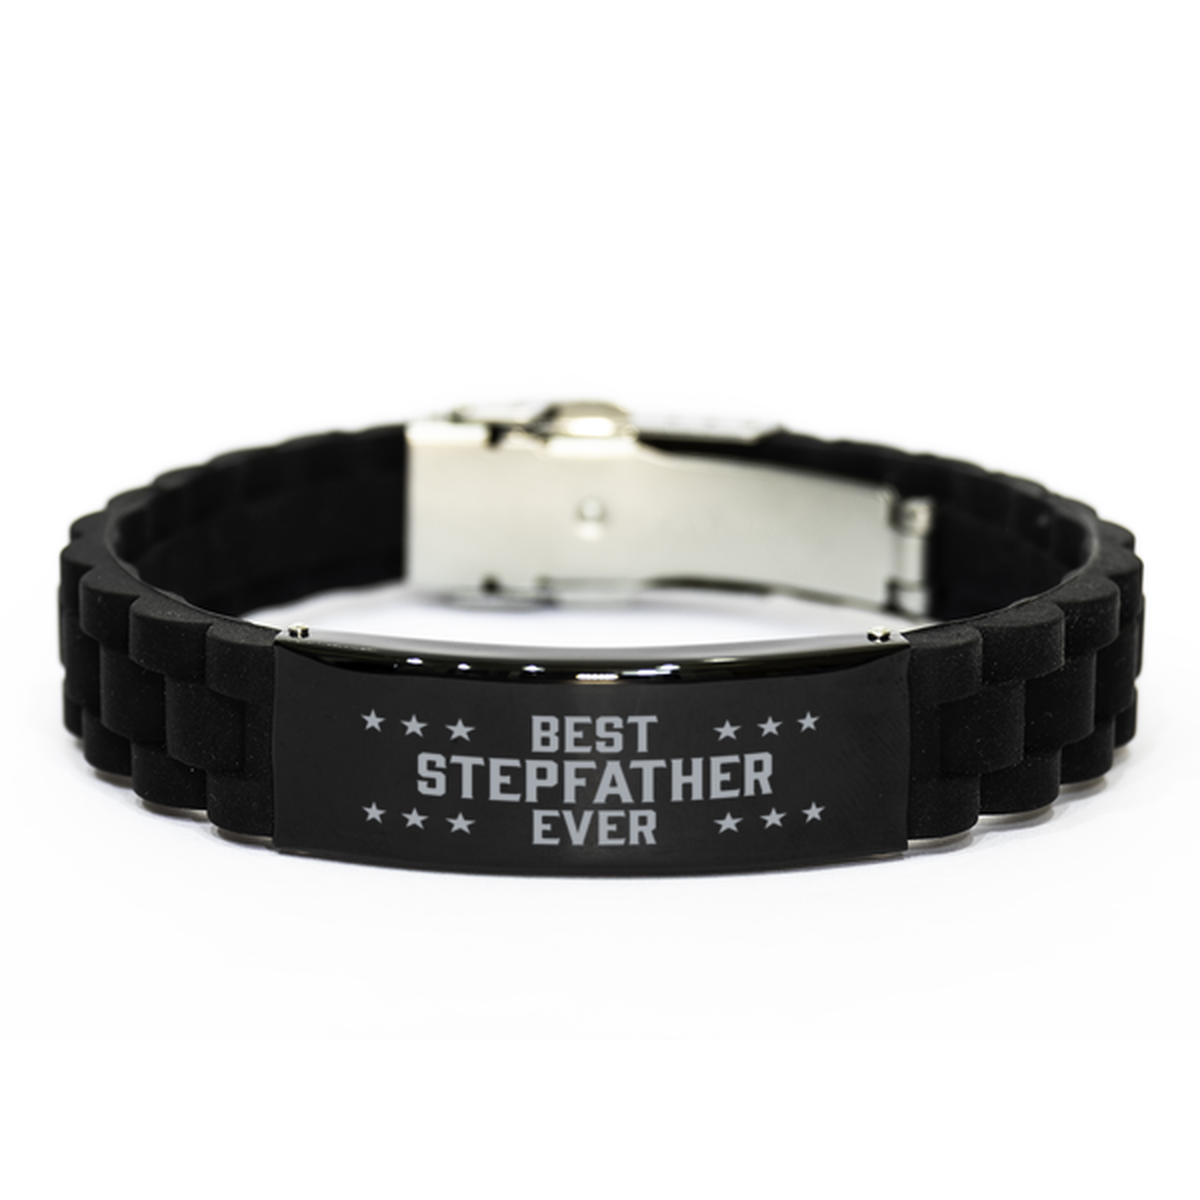 Best Stepfather Ever Stepfather Gifts, Funny Black Engraved Bracelet For Stepfather, Family Gifts For Men